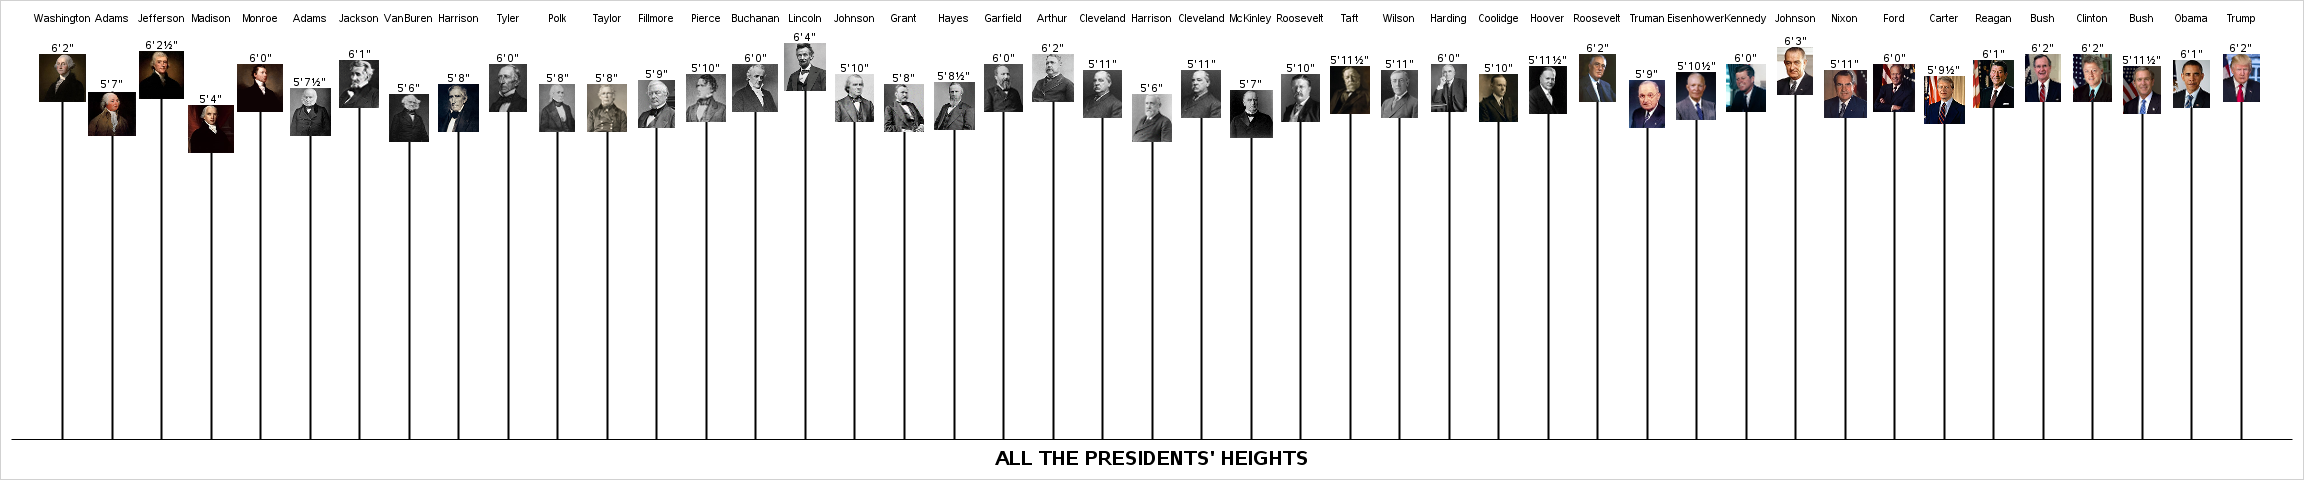 Presidents.png